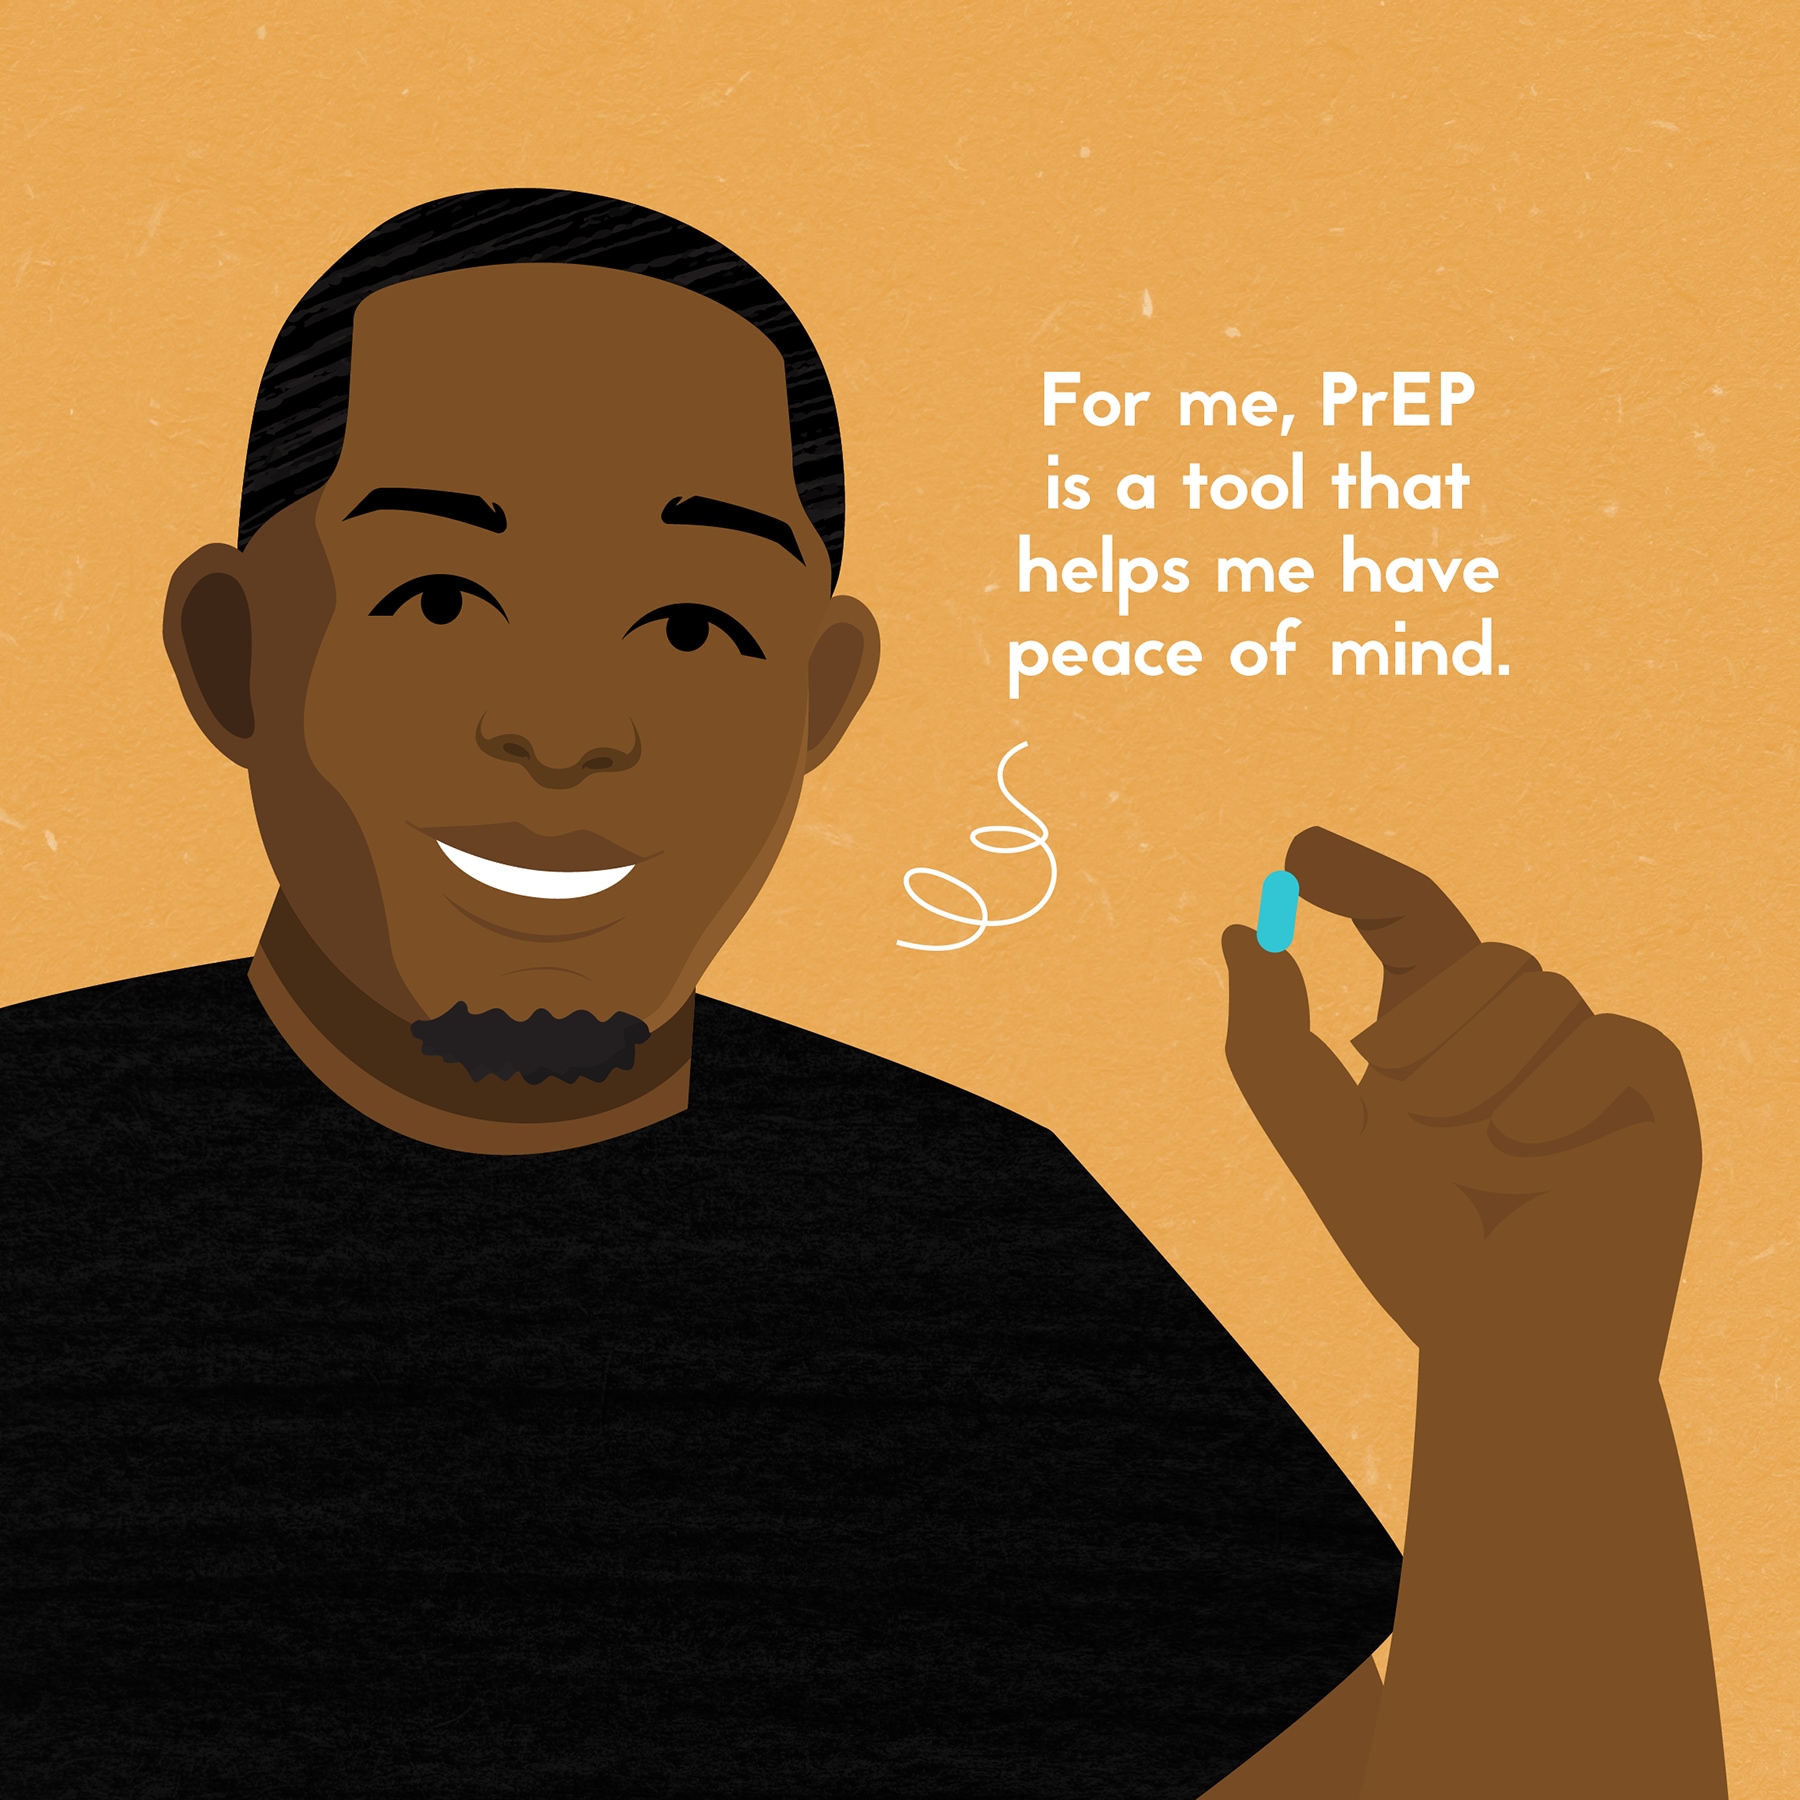 For me, PrEP is a tool that helps me have peace of mind.